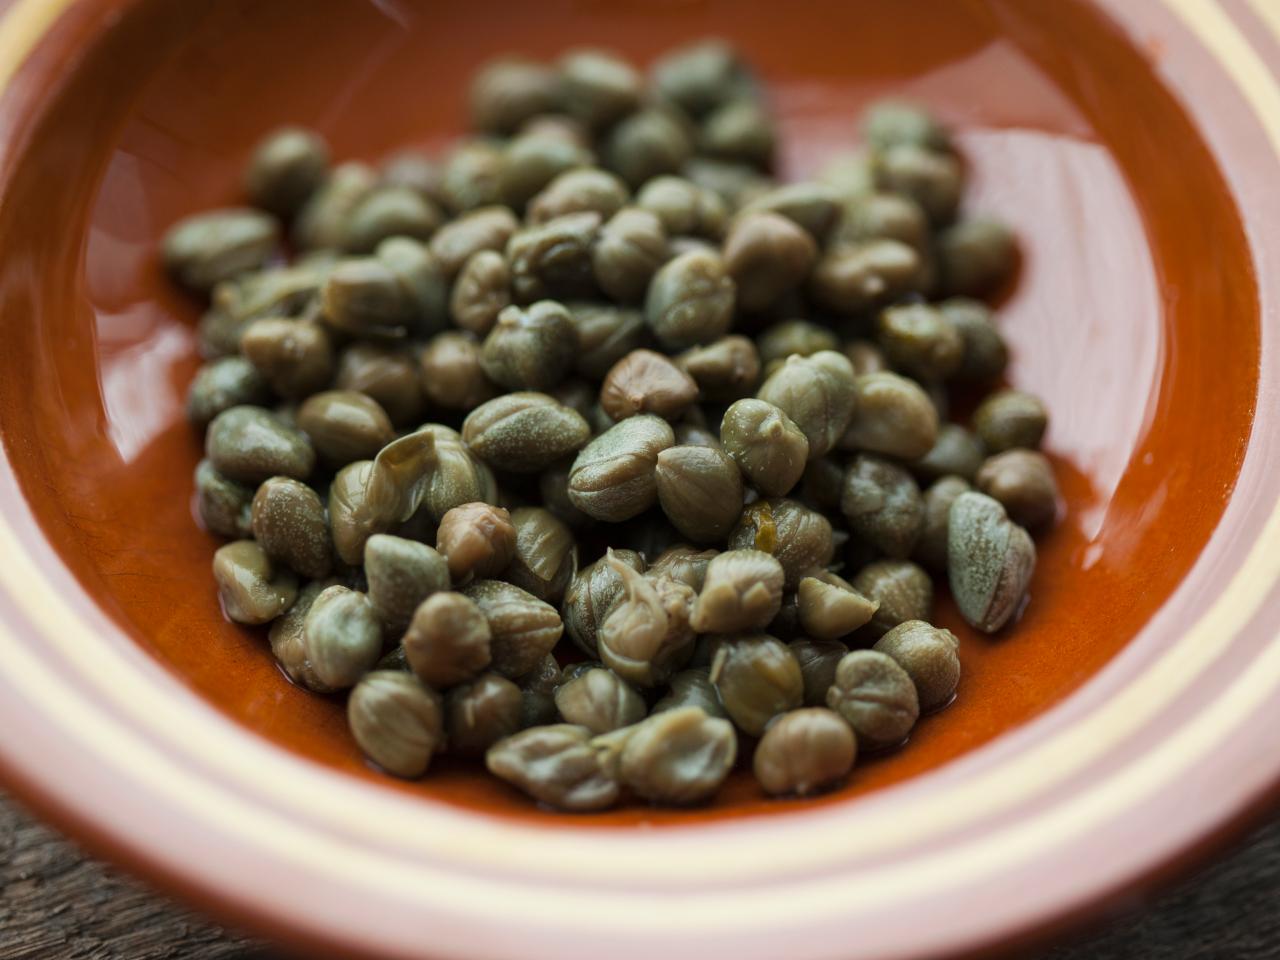 What Do Capers Taste Like? Exploring the Briny Flavor - What Are Capers?